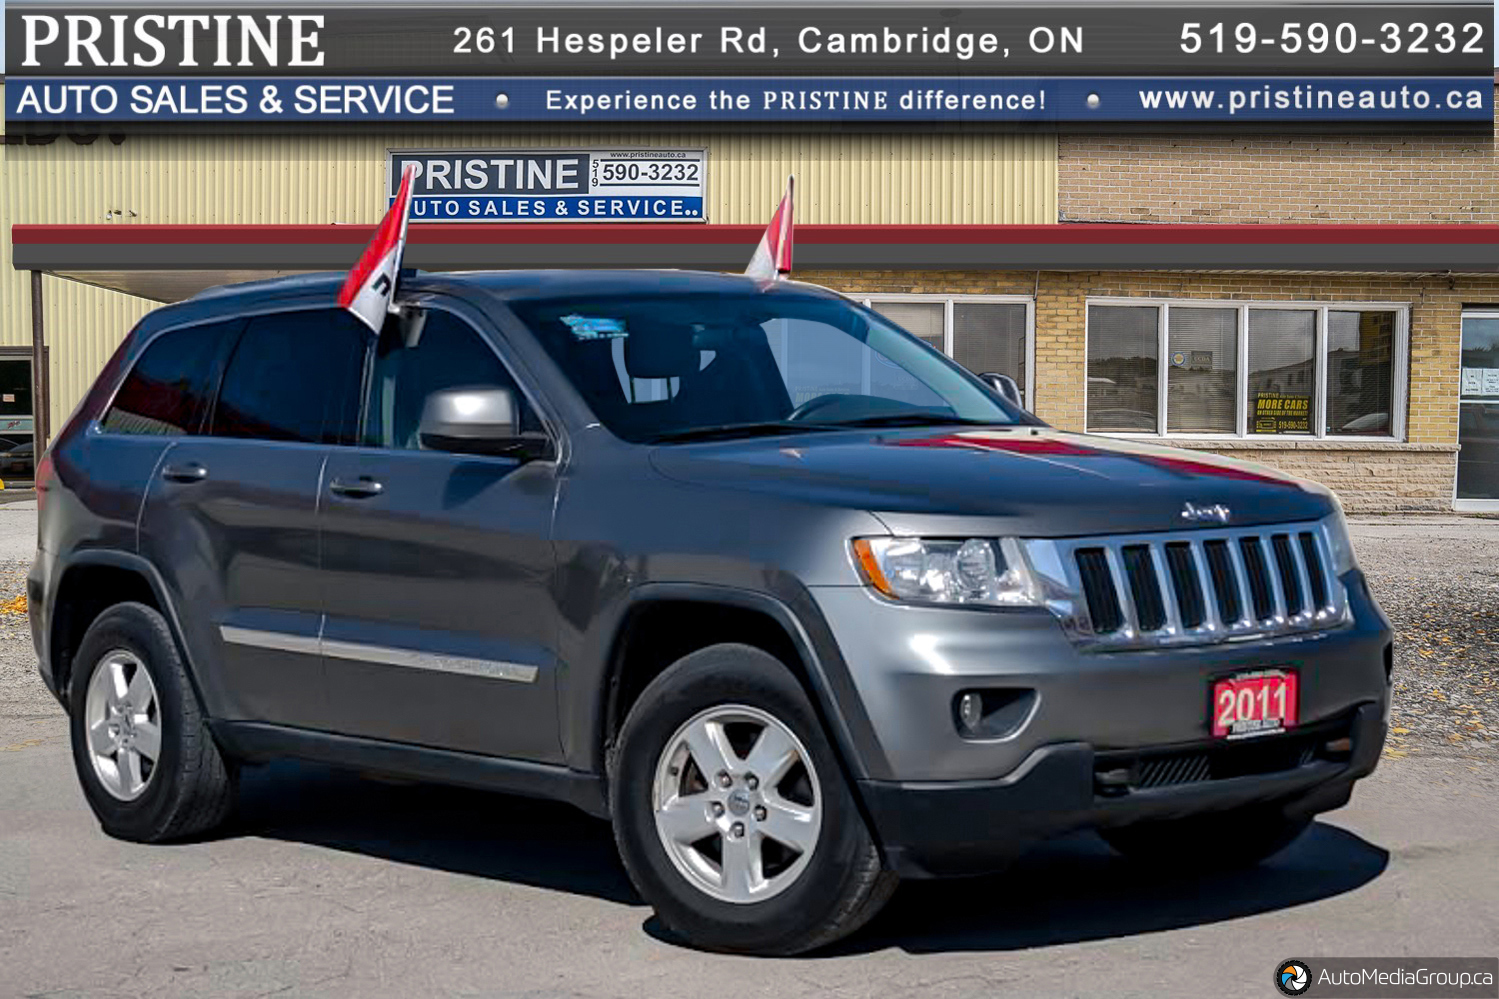 2011 Jeep Grand Cherokee Laredo 4WD Well Serviced No Accident or Rust